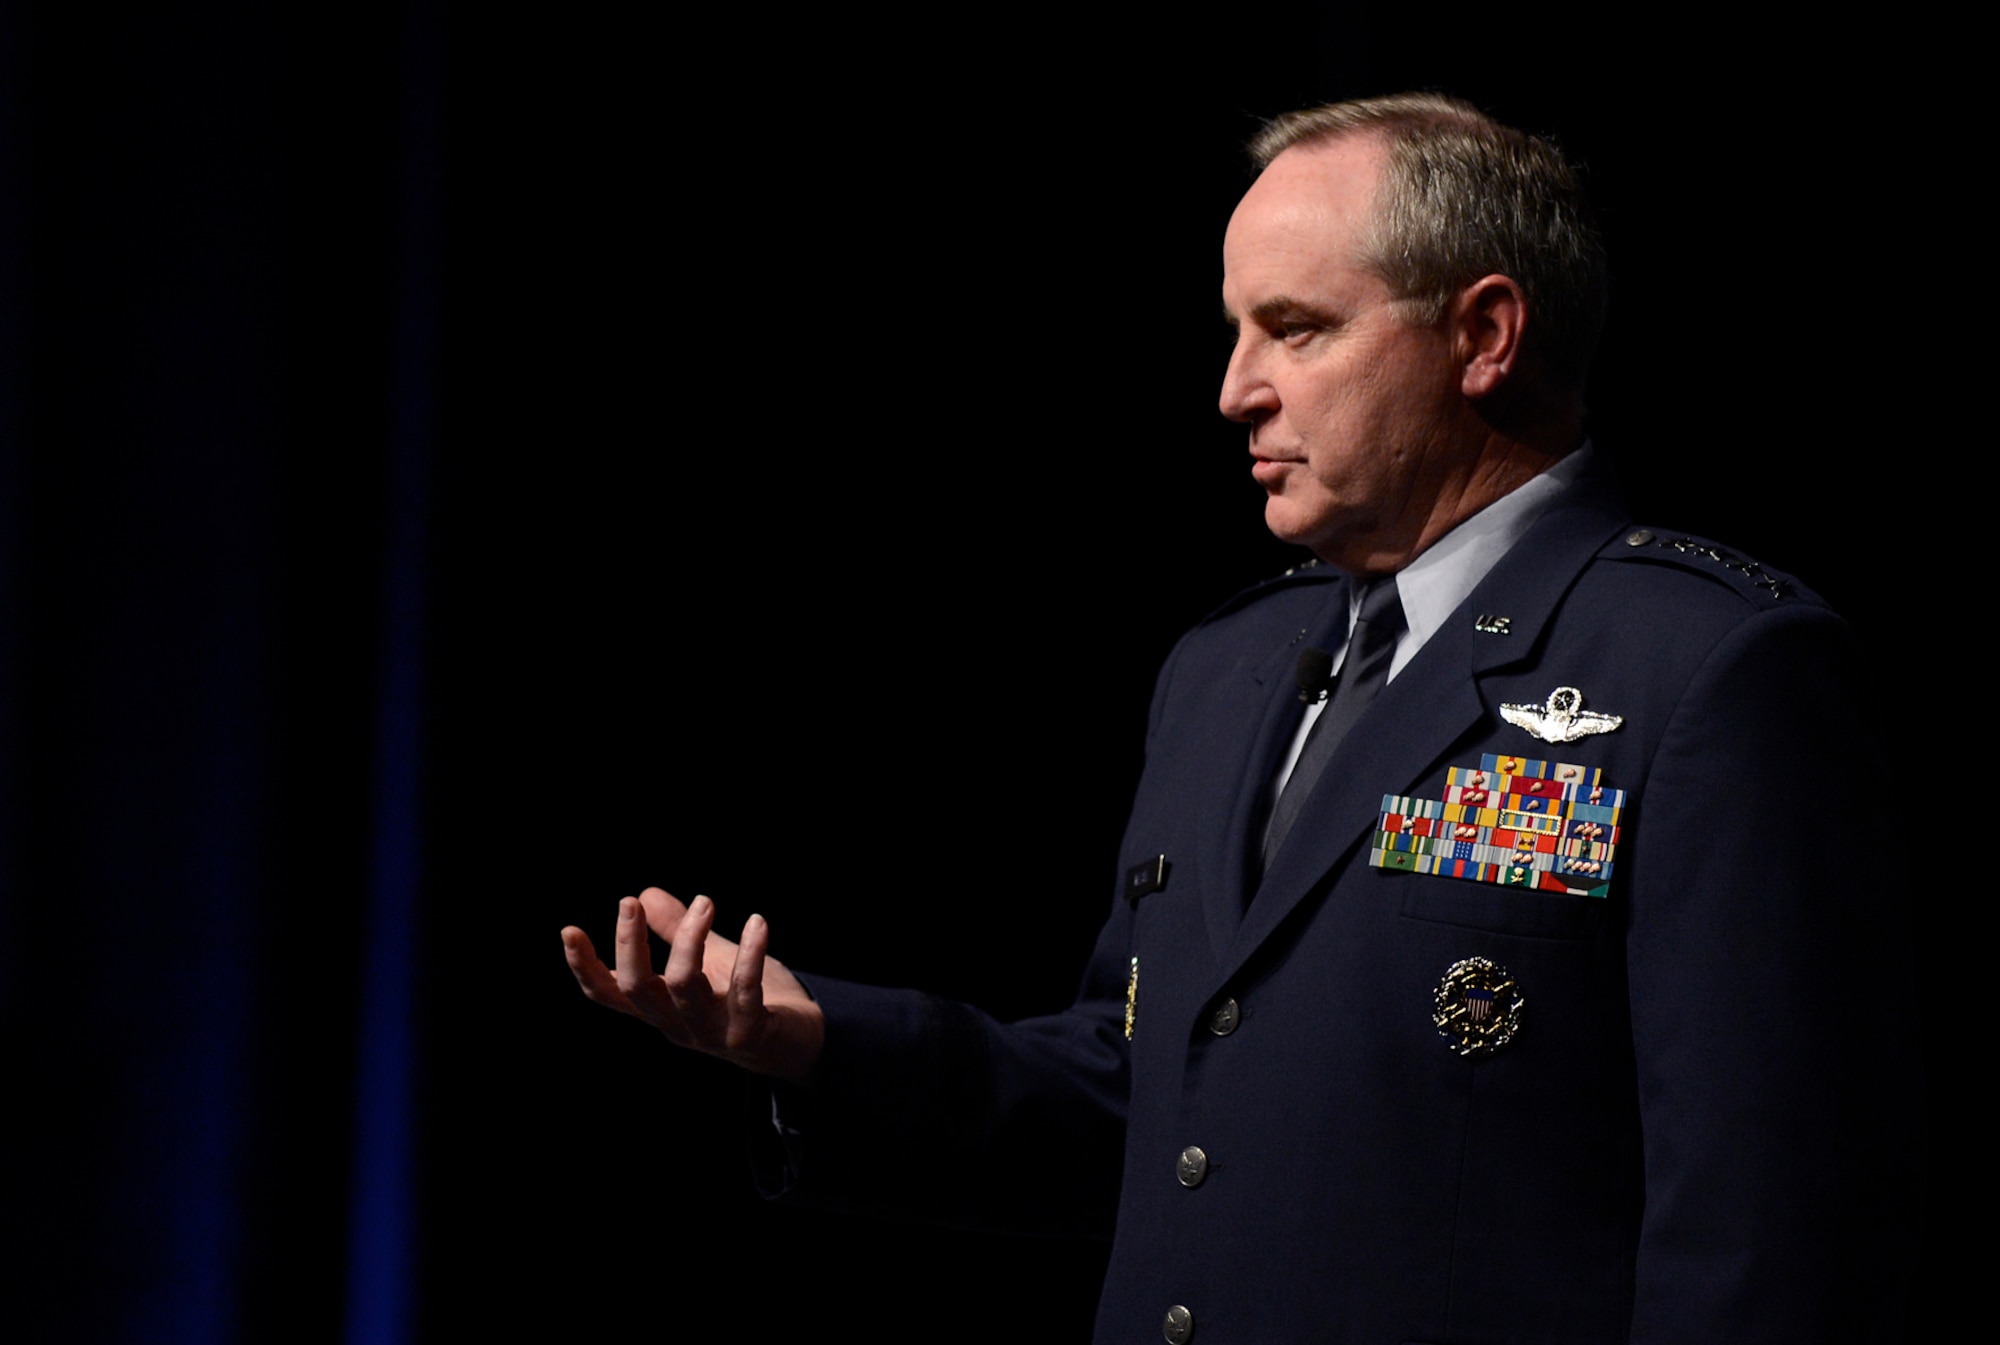 Air Force Chief of Staff Gen. Mark A. Welsh III delivers his keynote speech Feb. 20, 2014, at the 30th Annual AFA Air Warfare Symposium and Technology Exposition in Orlando, Fla. Welsh talked about focusing on the mission, developing and celebrating Airmen, strengthening and embracing partnerships, and living our core values.  (U.S. Air Force photo/Scott M. Ash)